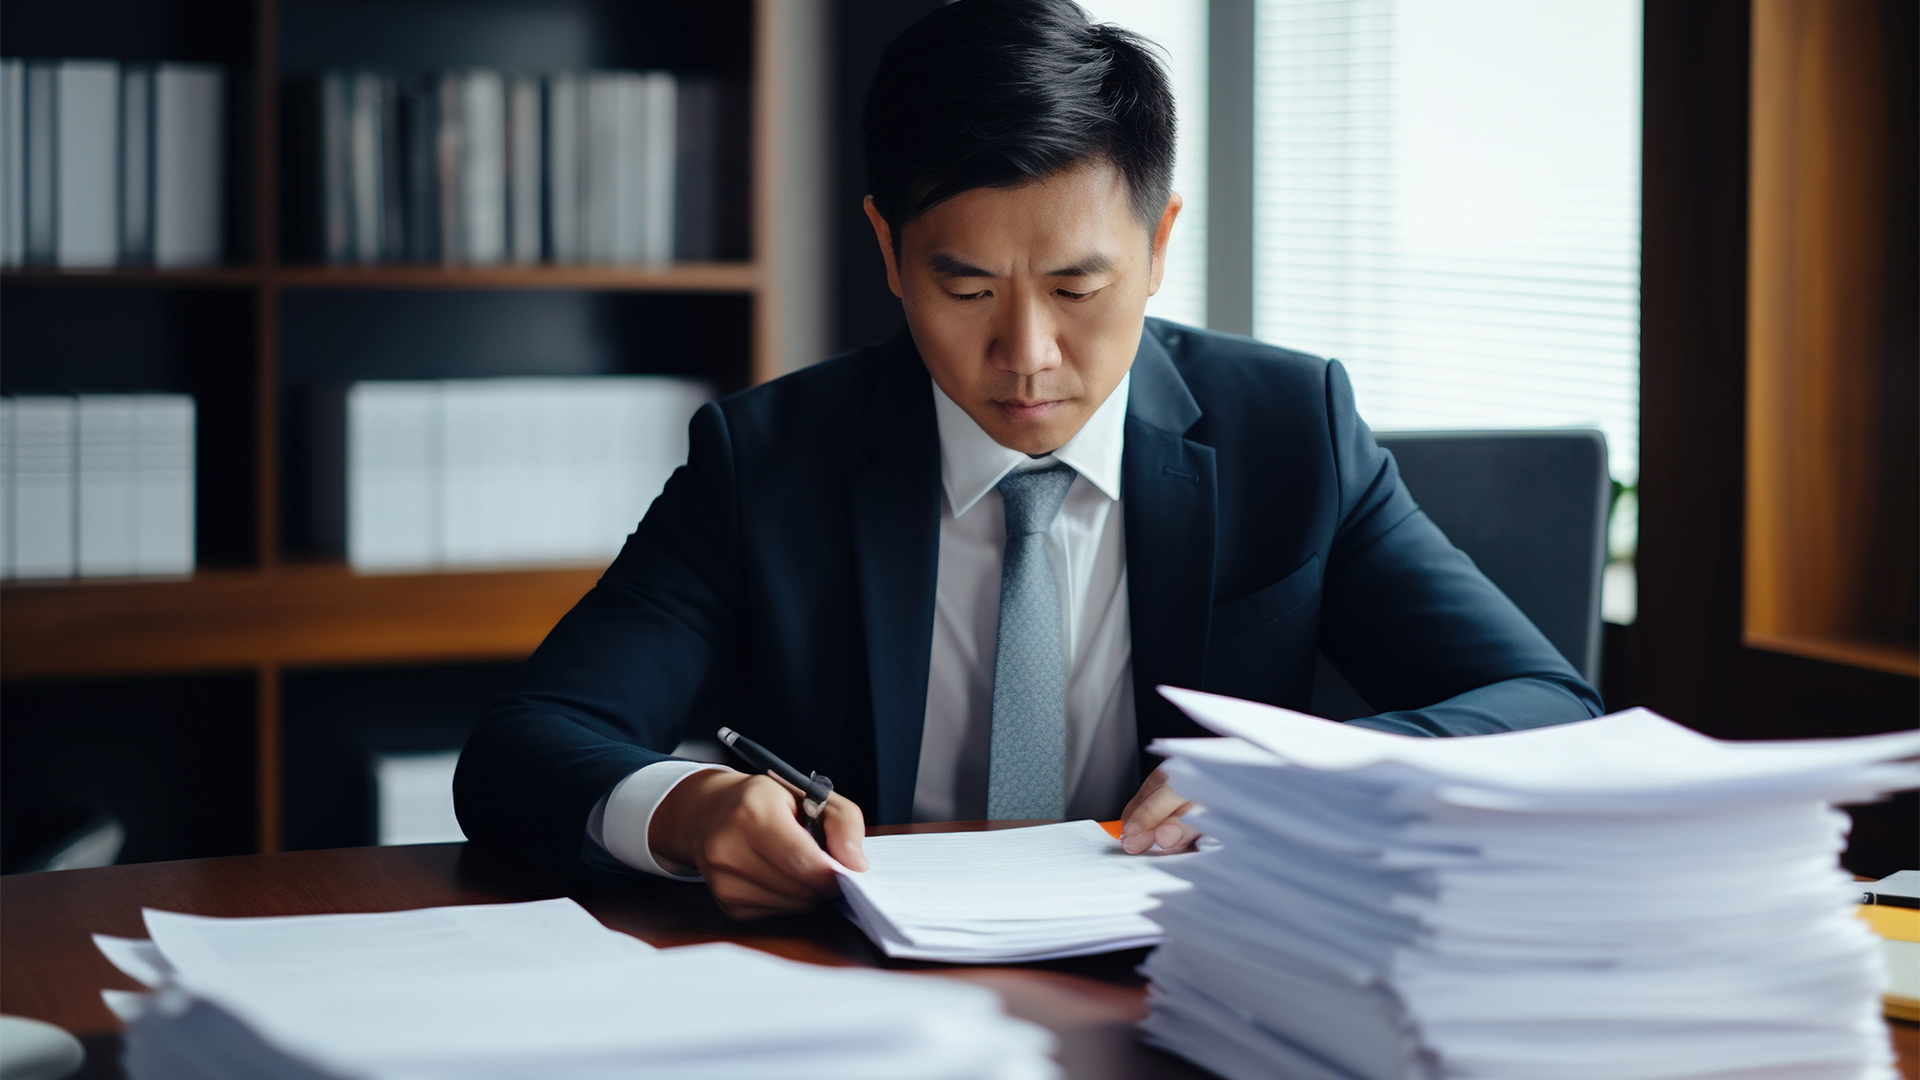 ax accountant manager holding paper documents checking bills, doing sales invoice accounting, reading legal contract or bank statement sitting at desk in office